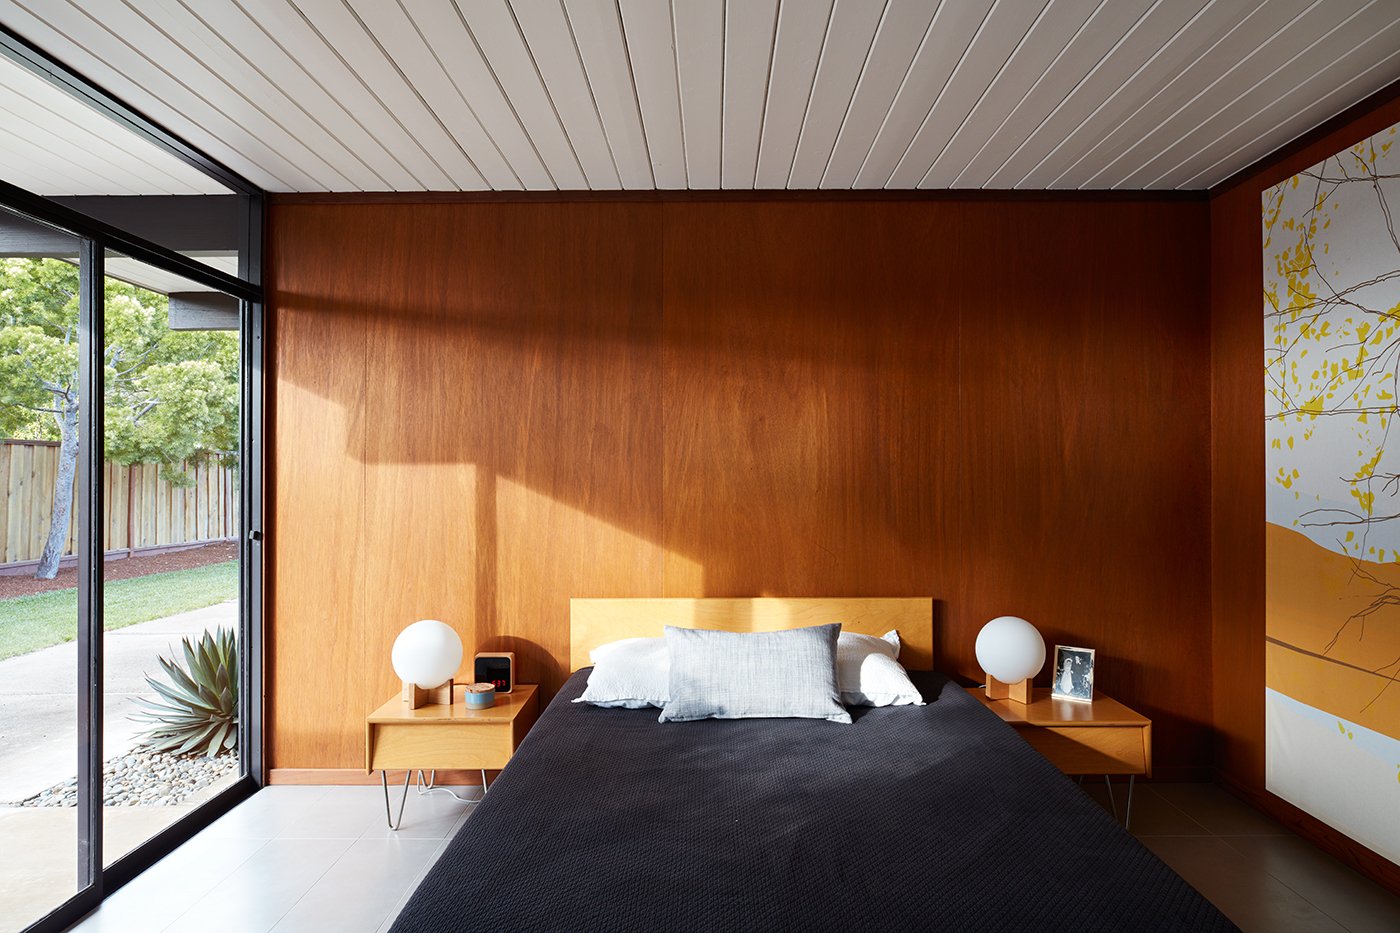 Eichler house in San Mateo Highlands - Klopf architecture - bedroom